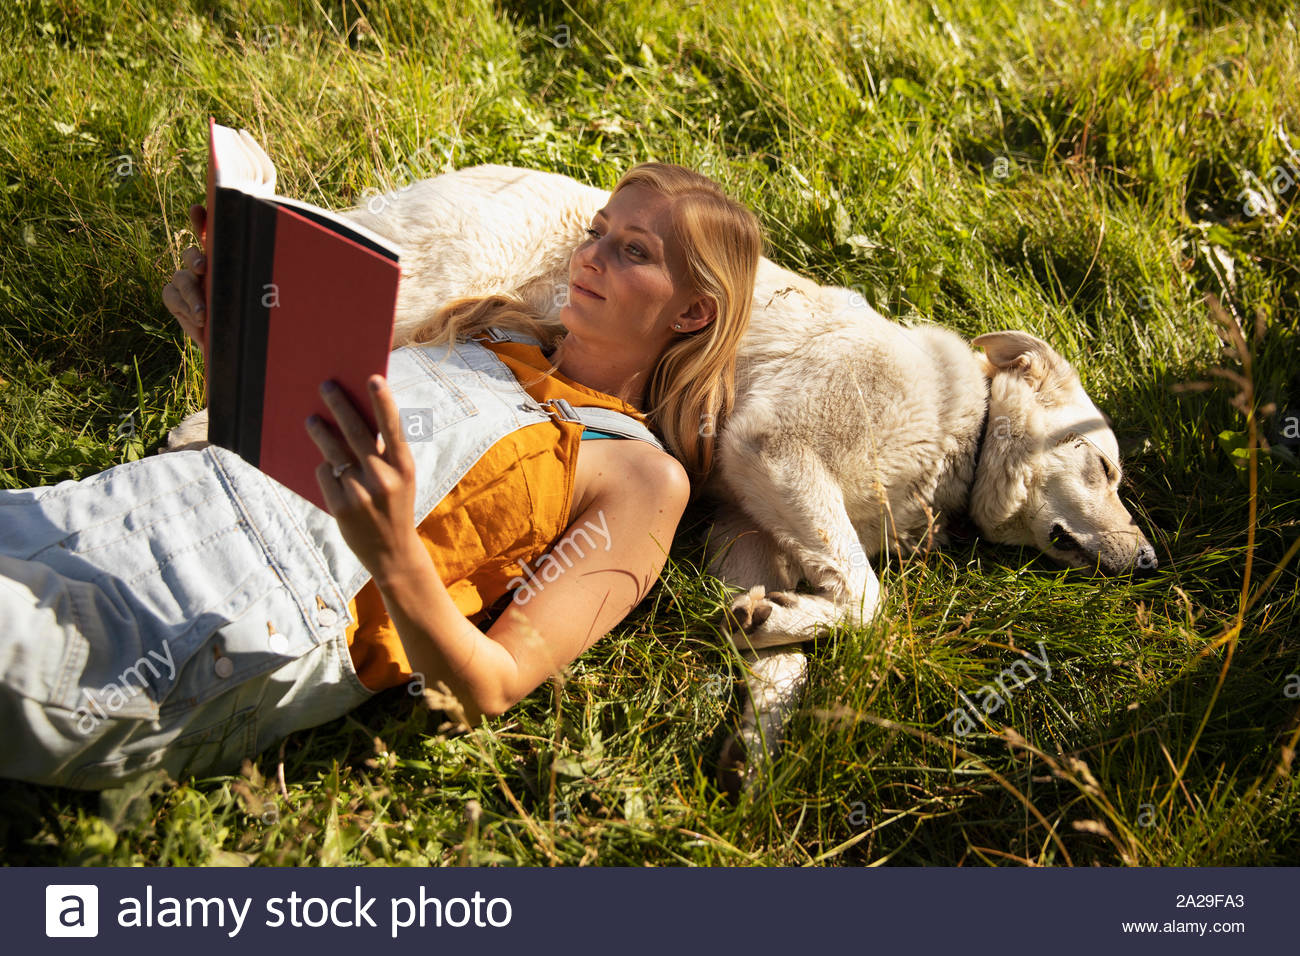 Young woman lying with dog on grass reading book Stock Photo